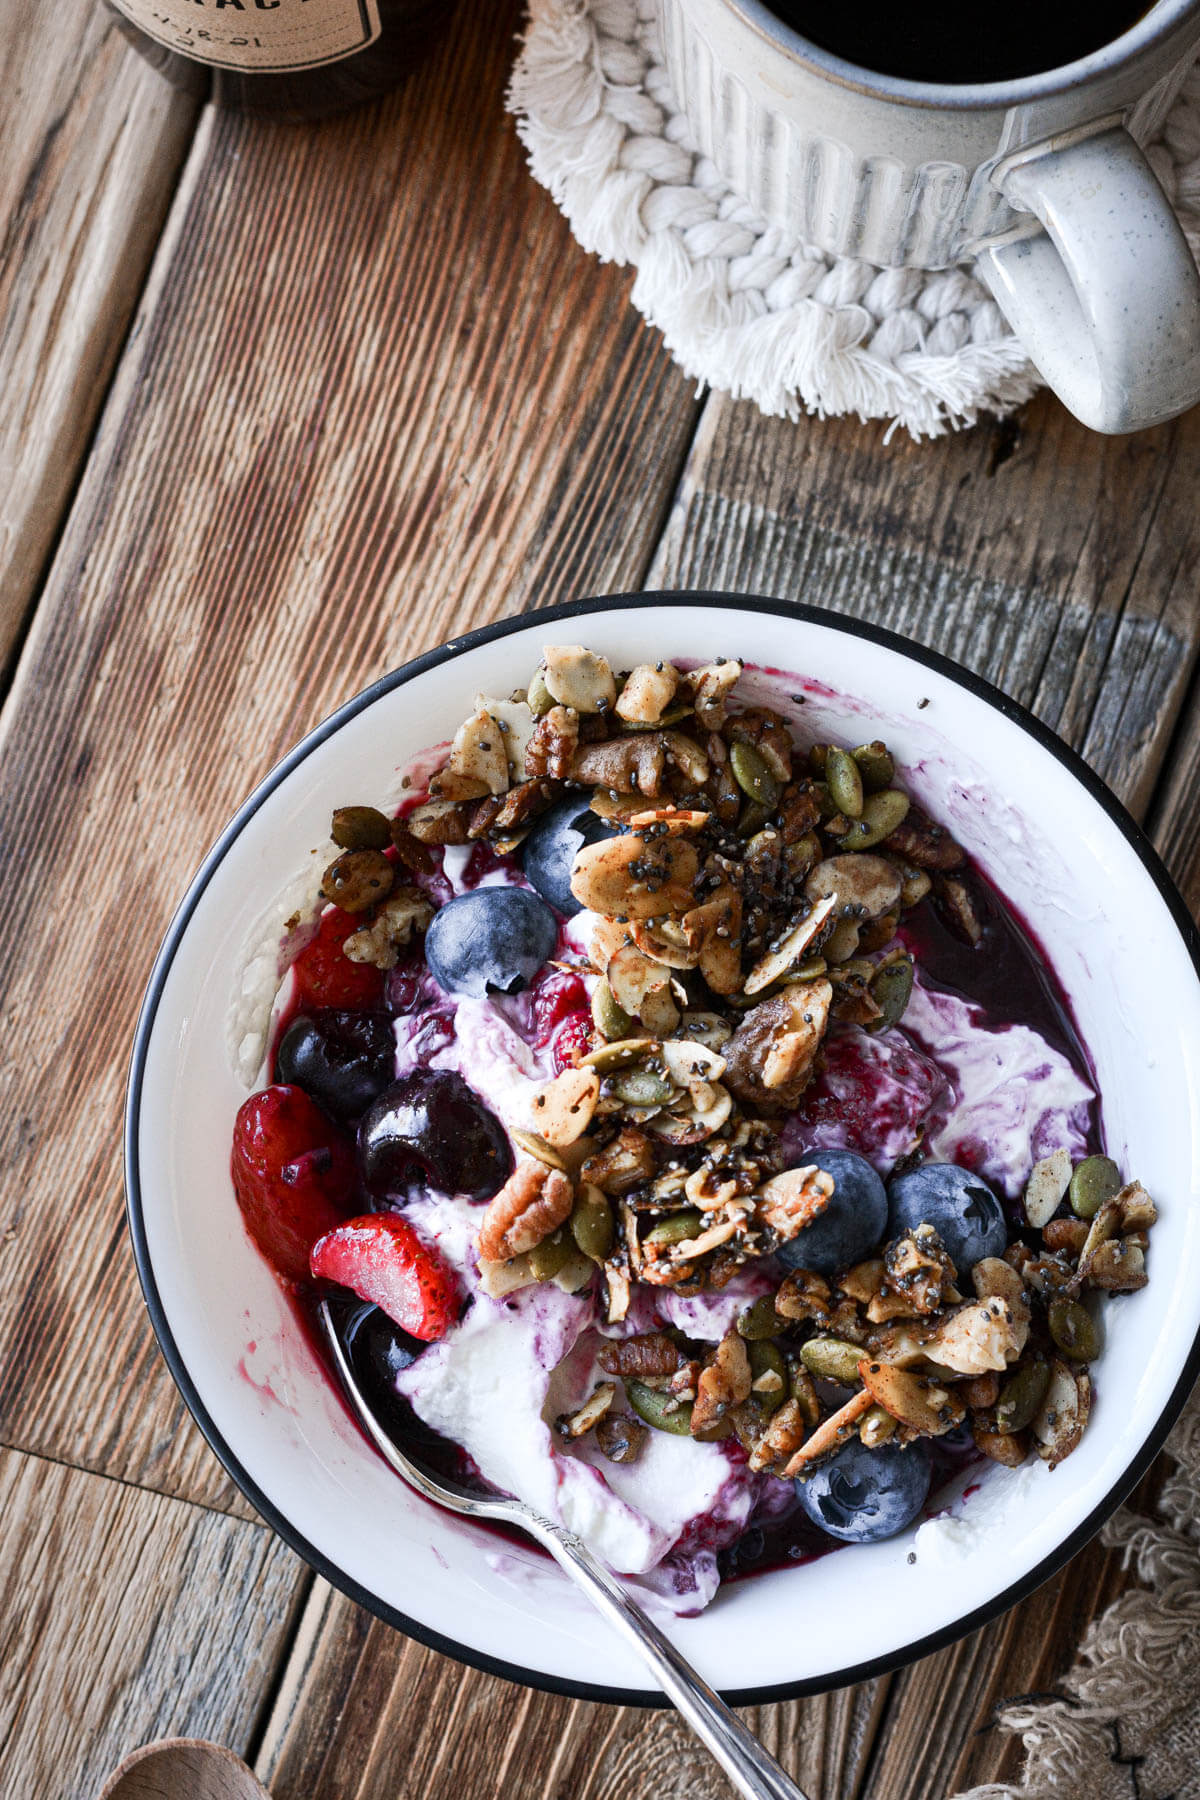 A bowl of yogurt and berries topped with granola.